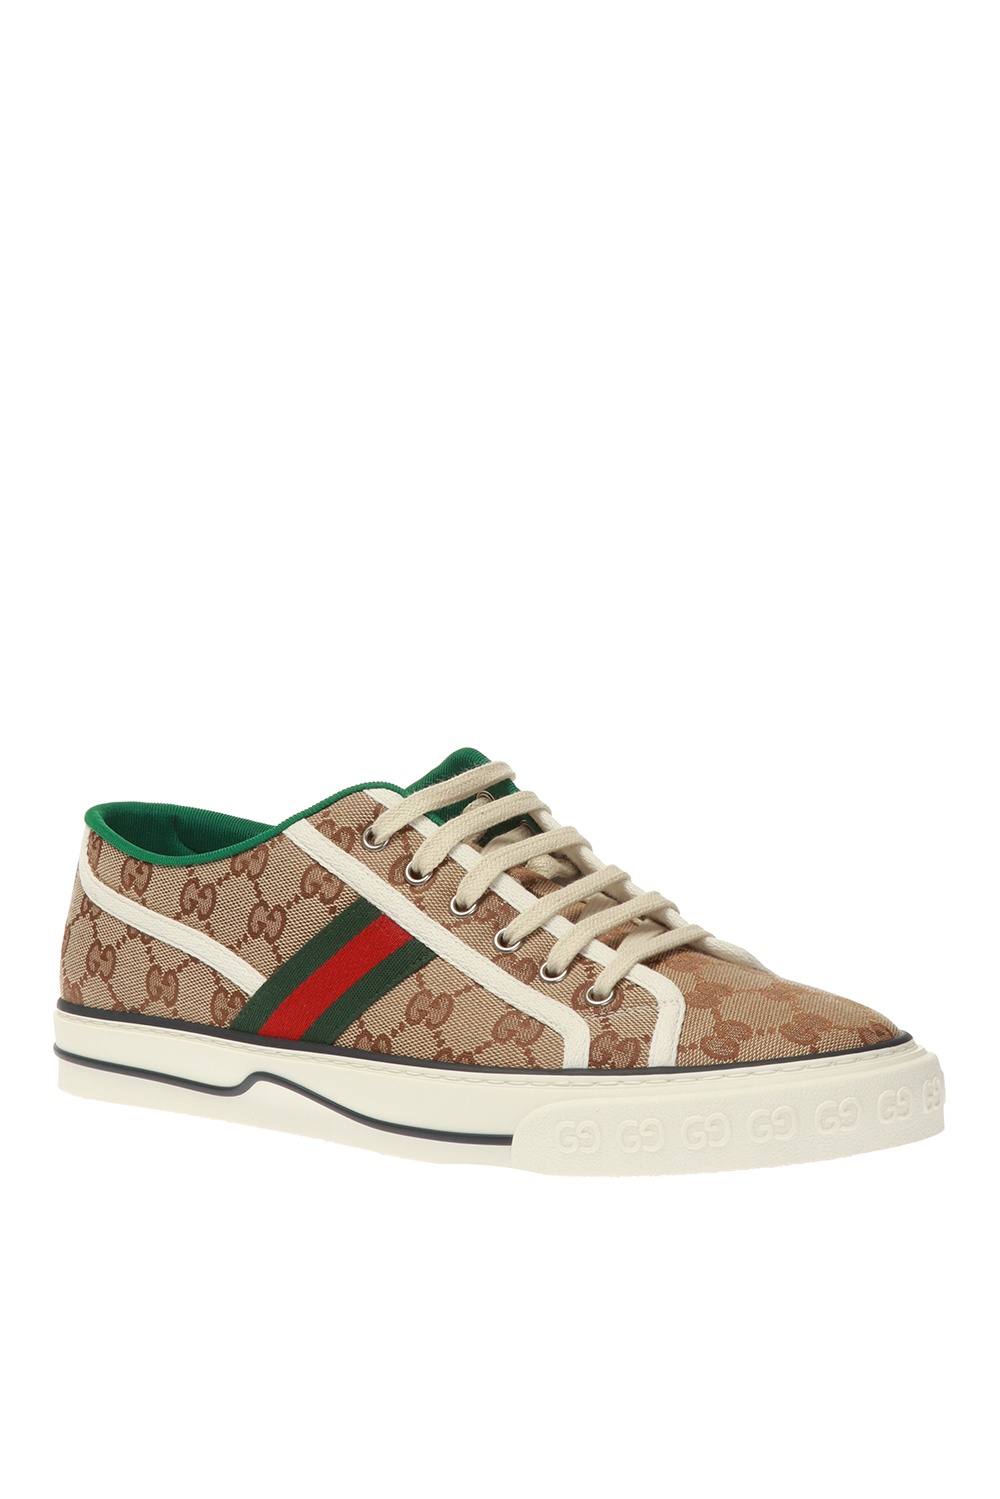 gucci sterling 'Tennis' sneakers